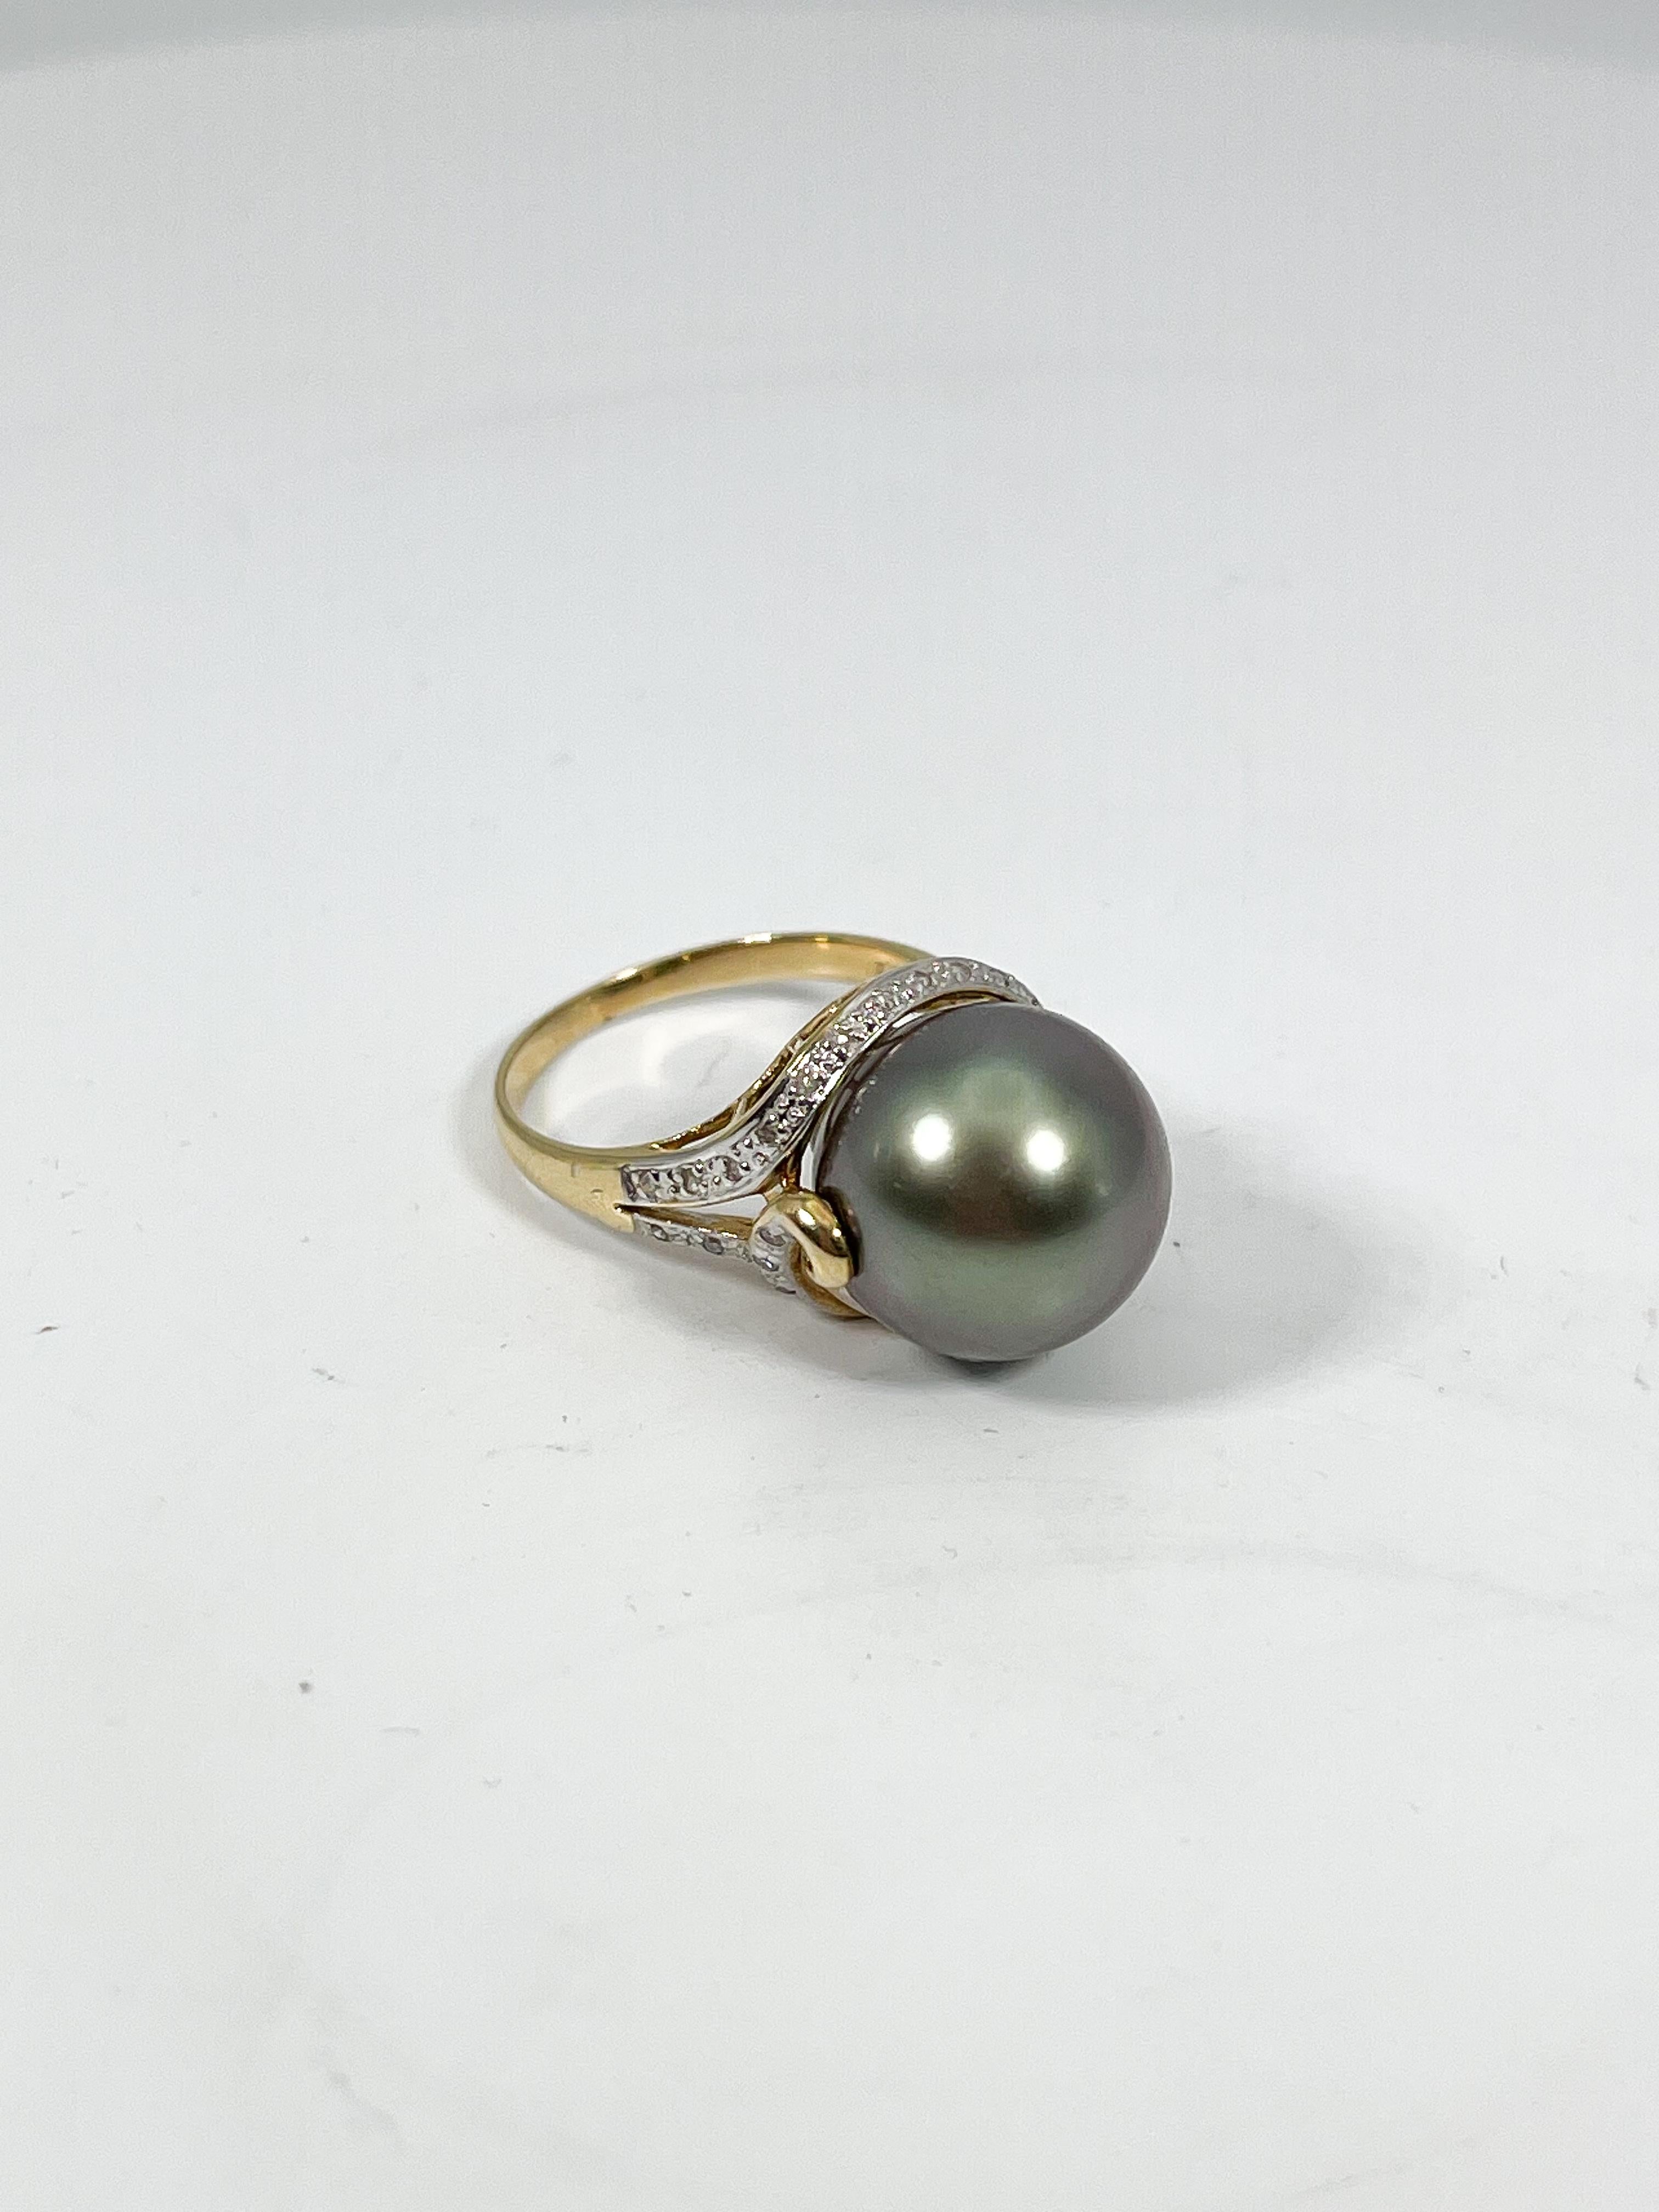 14k yellow gold cultured black pearl and diamond ring. This ring has round diamonds along the sides of the ring, the width of the pearl is 13 mm, the size of the ring is a 6 1/2, and it has a total weight of 6.36 grams.